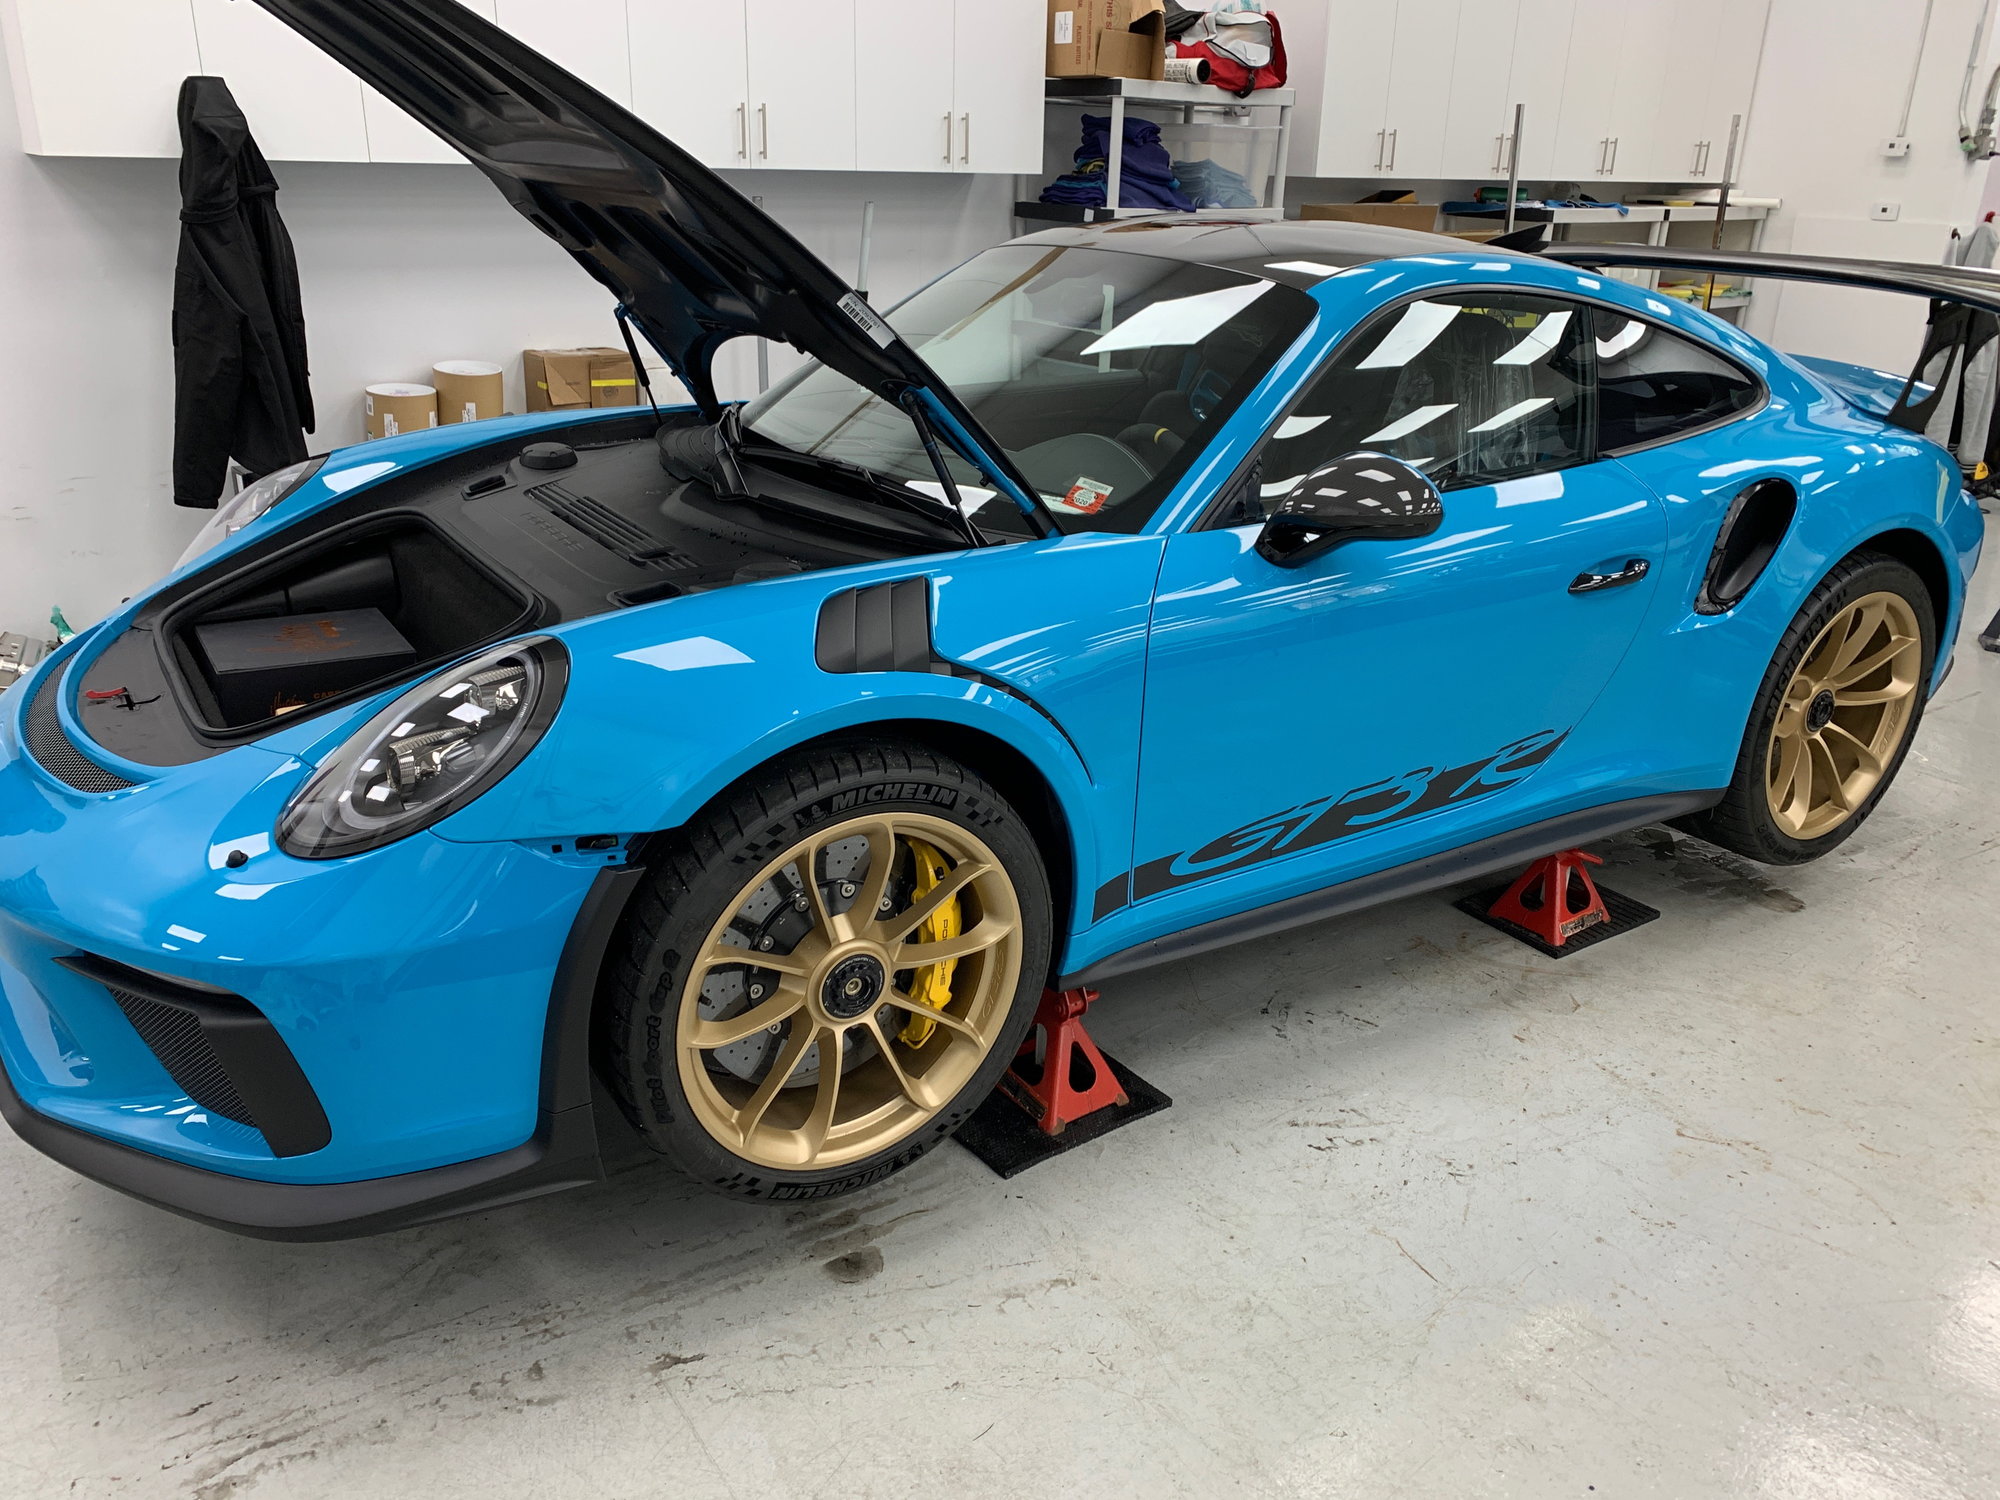 Wheels and Tires/Axles - 2019 gt3rs wheels satin aurum - New - 2016 to 2019 Porsche 911 - Currently In Cranbury, NJ 08512, United States